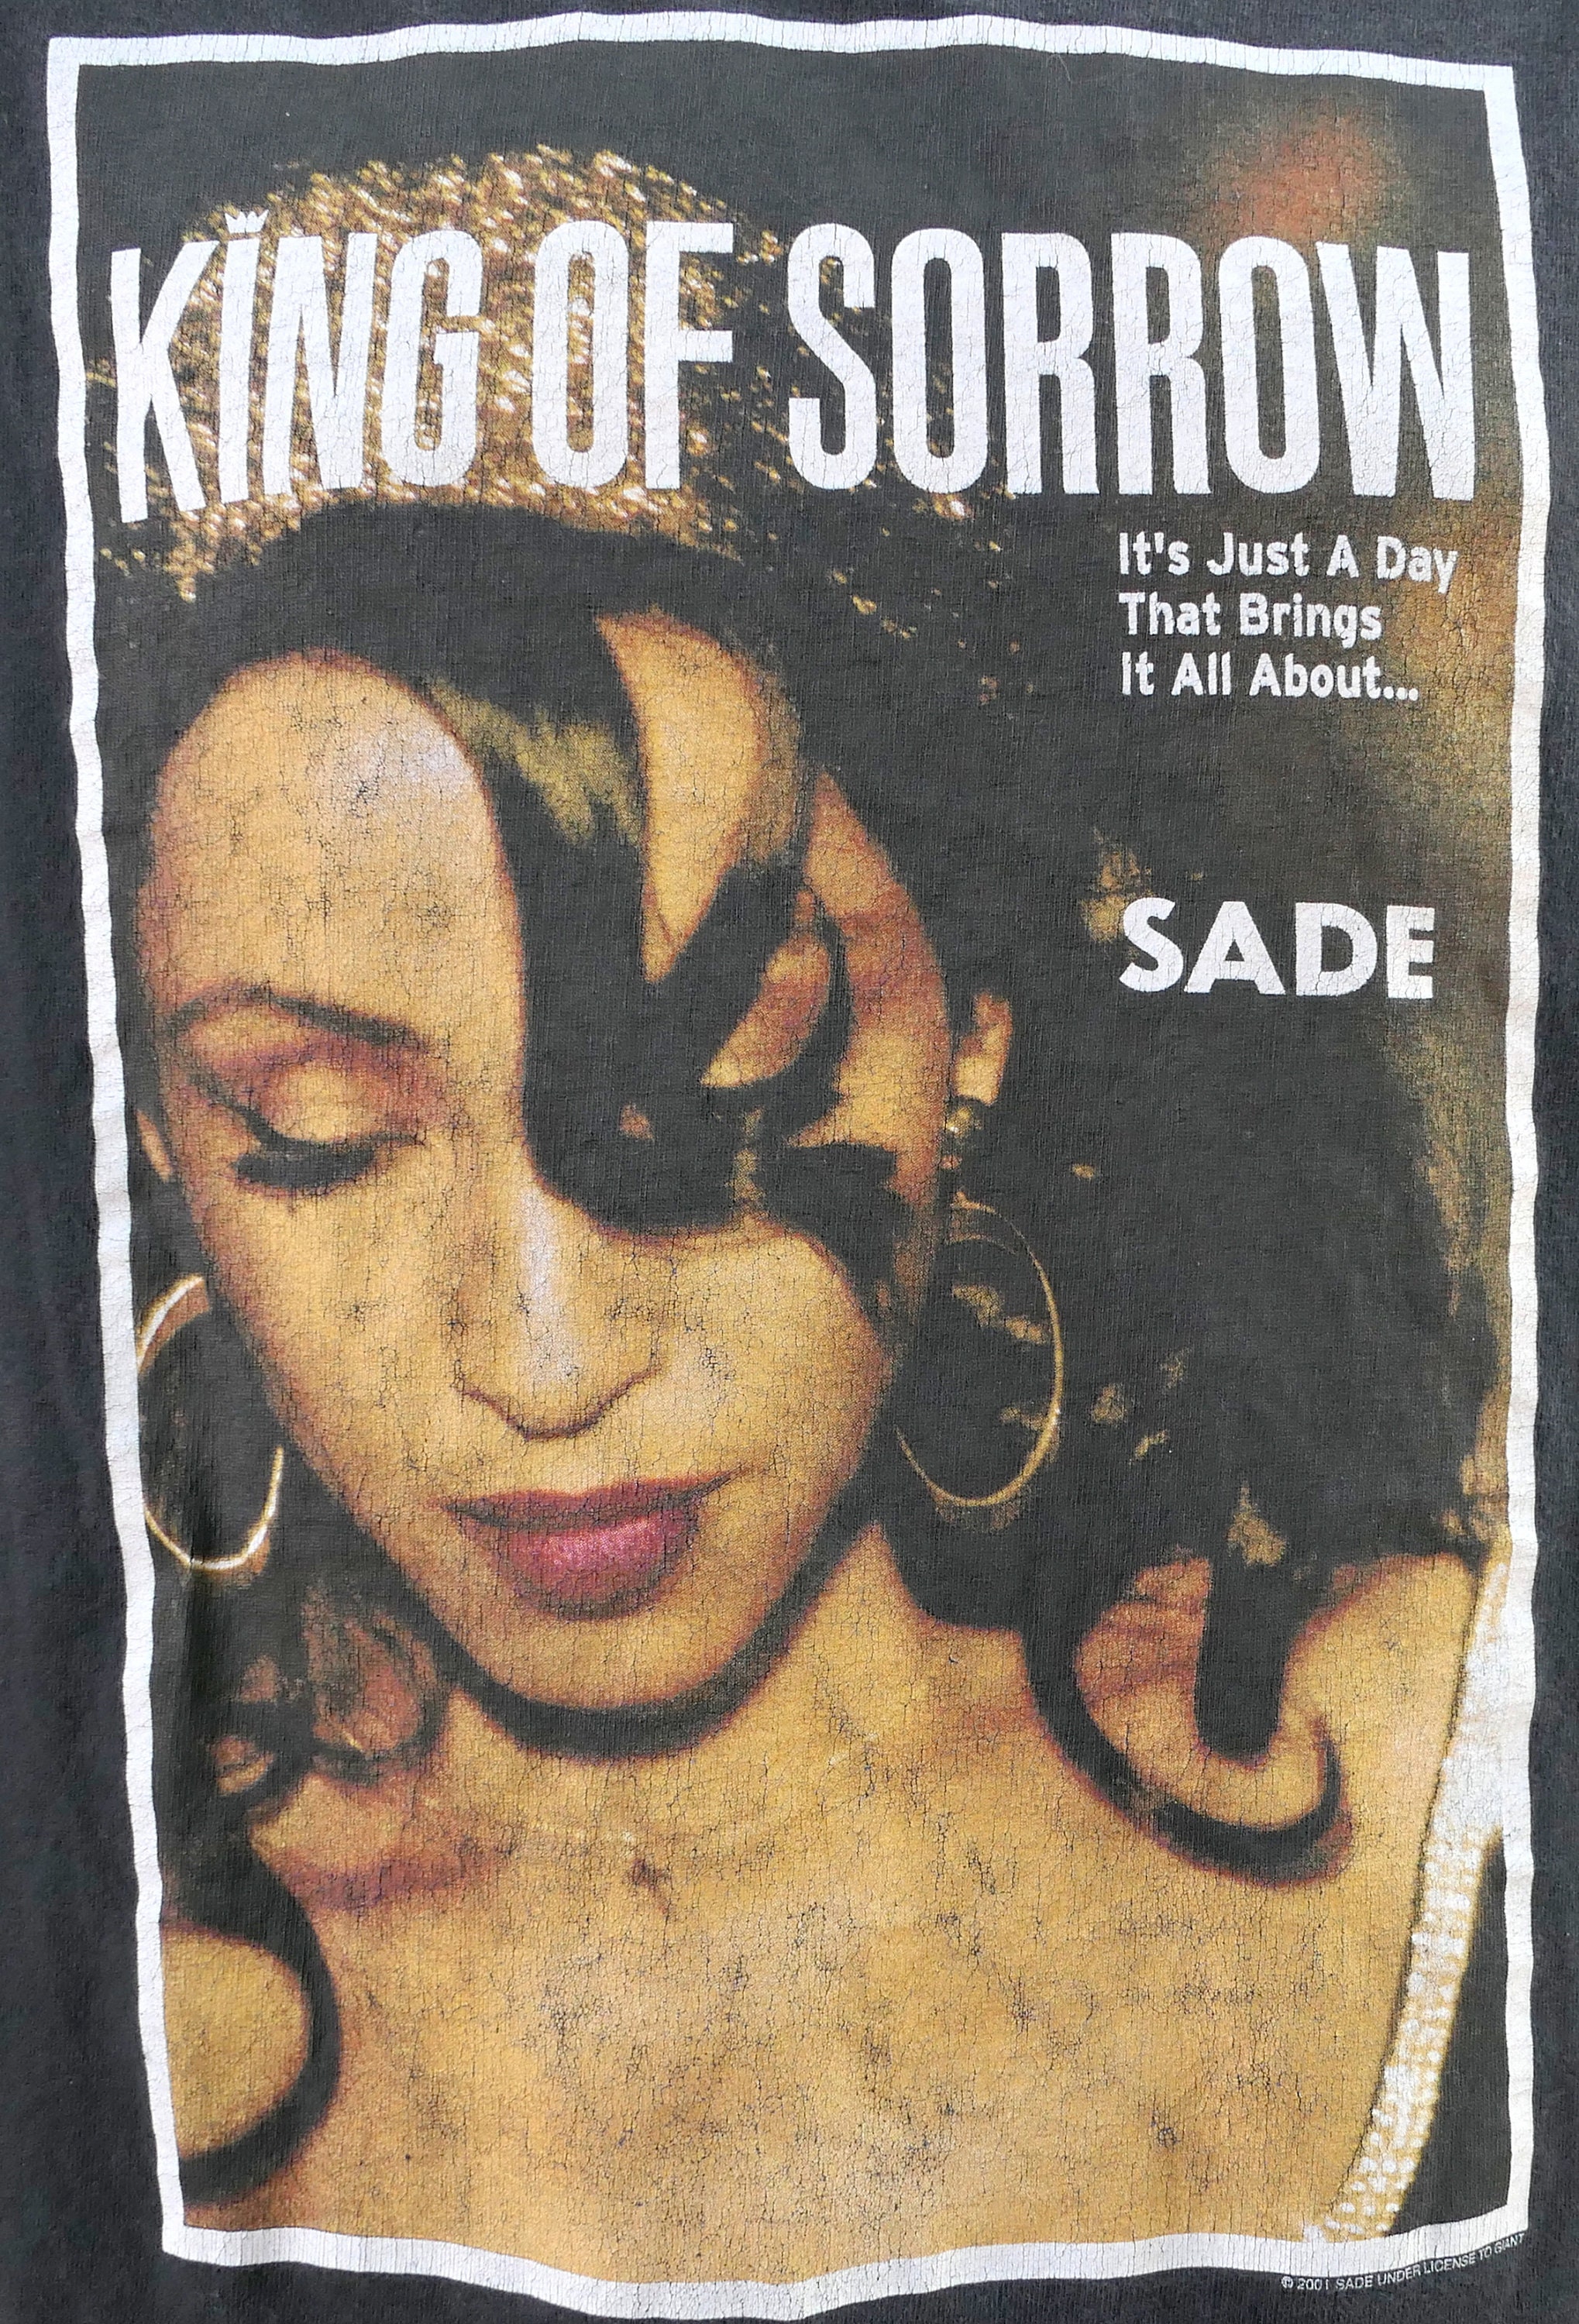 Vintage 2001 SADE King of Sorrow T Shirt XL With Alstyle Tag - Etsy